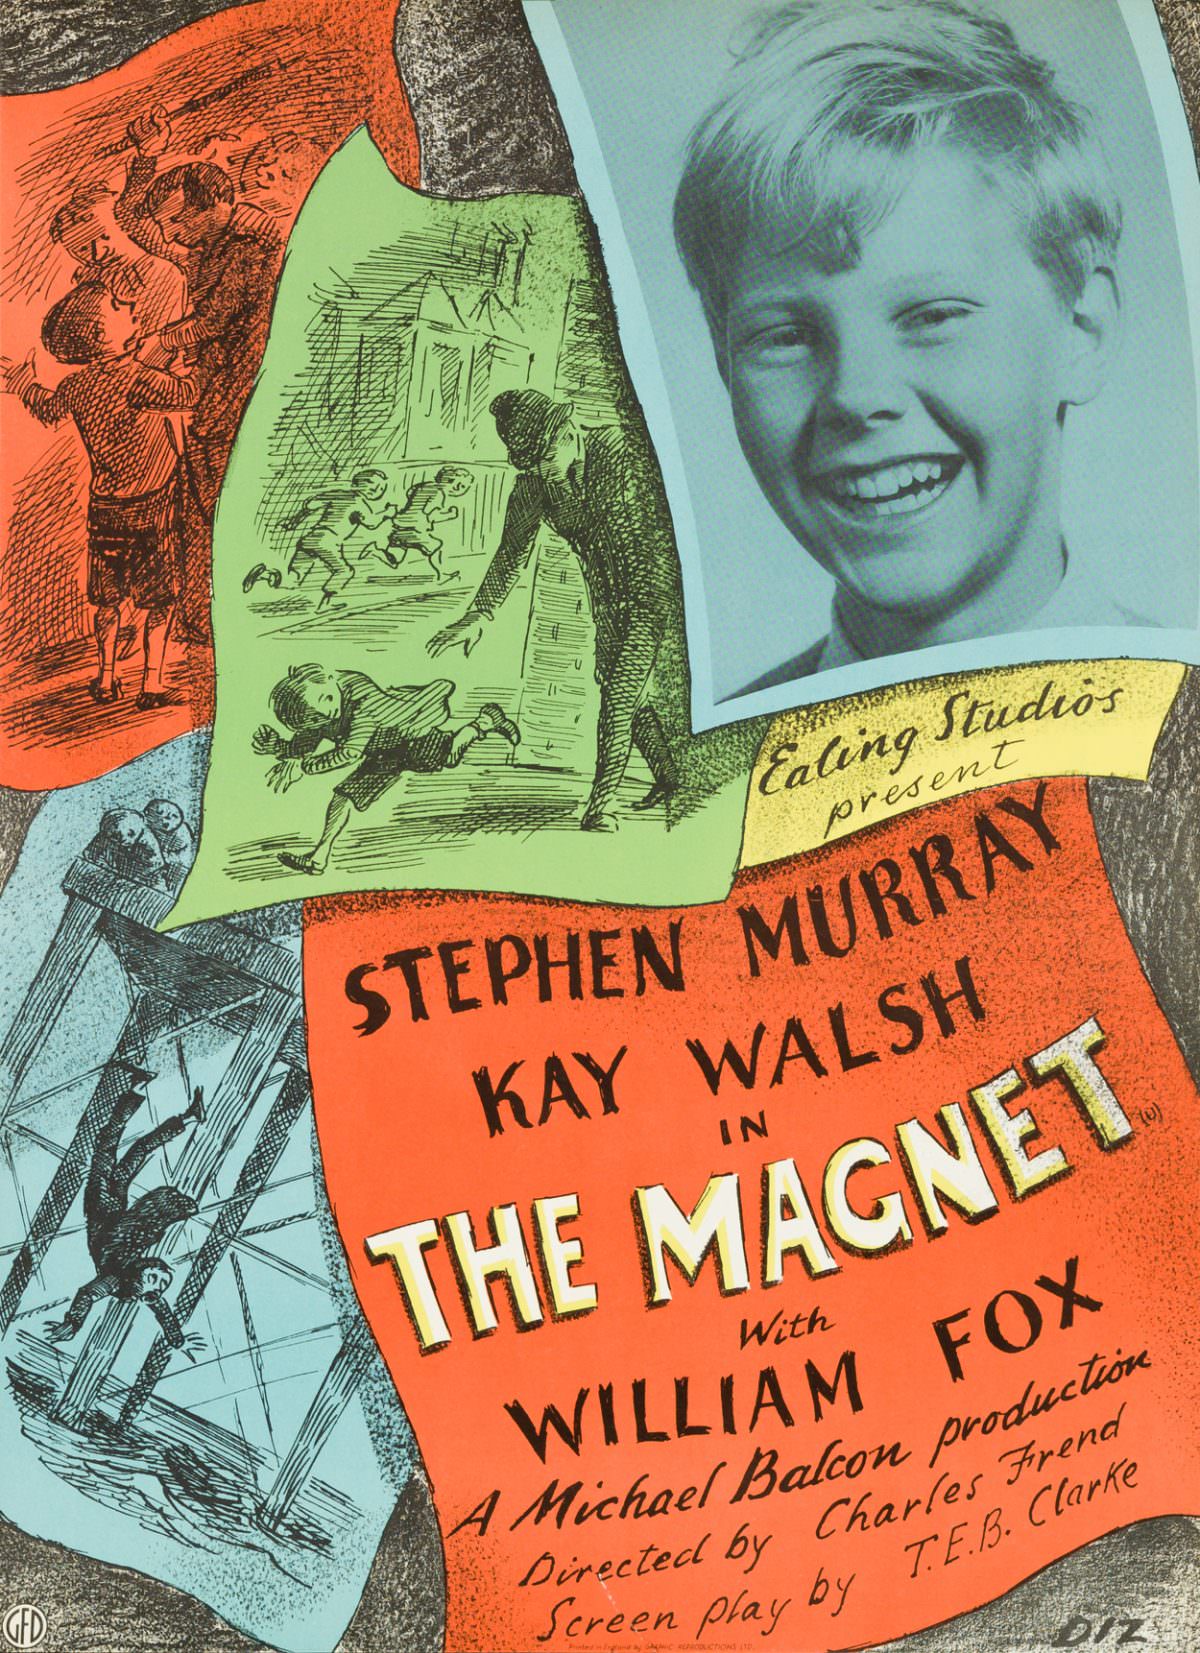 The Magnet is a 1950 British comedy film featuring Stephen Murray, Kay Walsh and in his first starring role James Fox (then billed as William Fox).